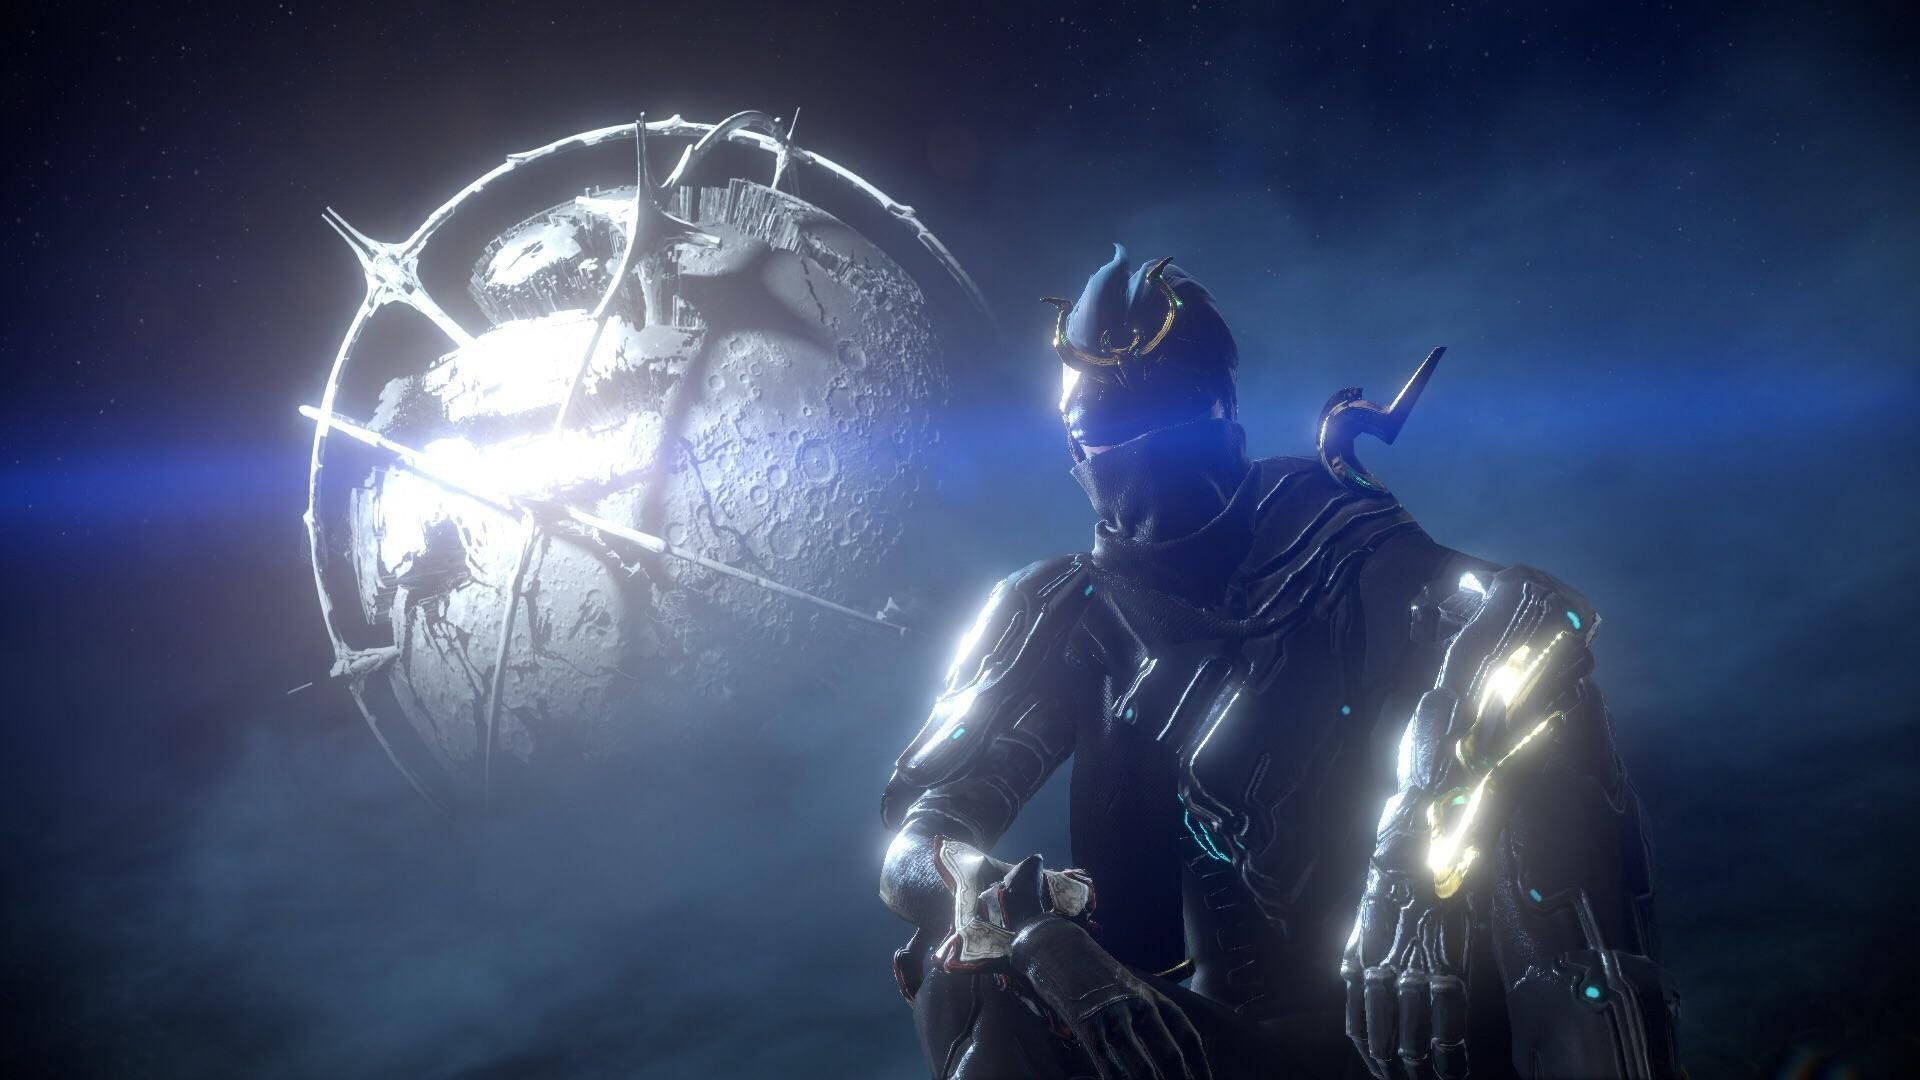 Tenno soldier with armor sitting beside Orokin Moon from Warframe wallpaper.